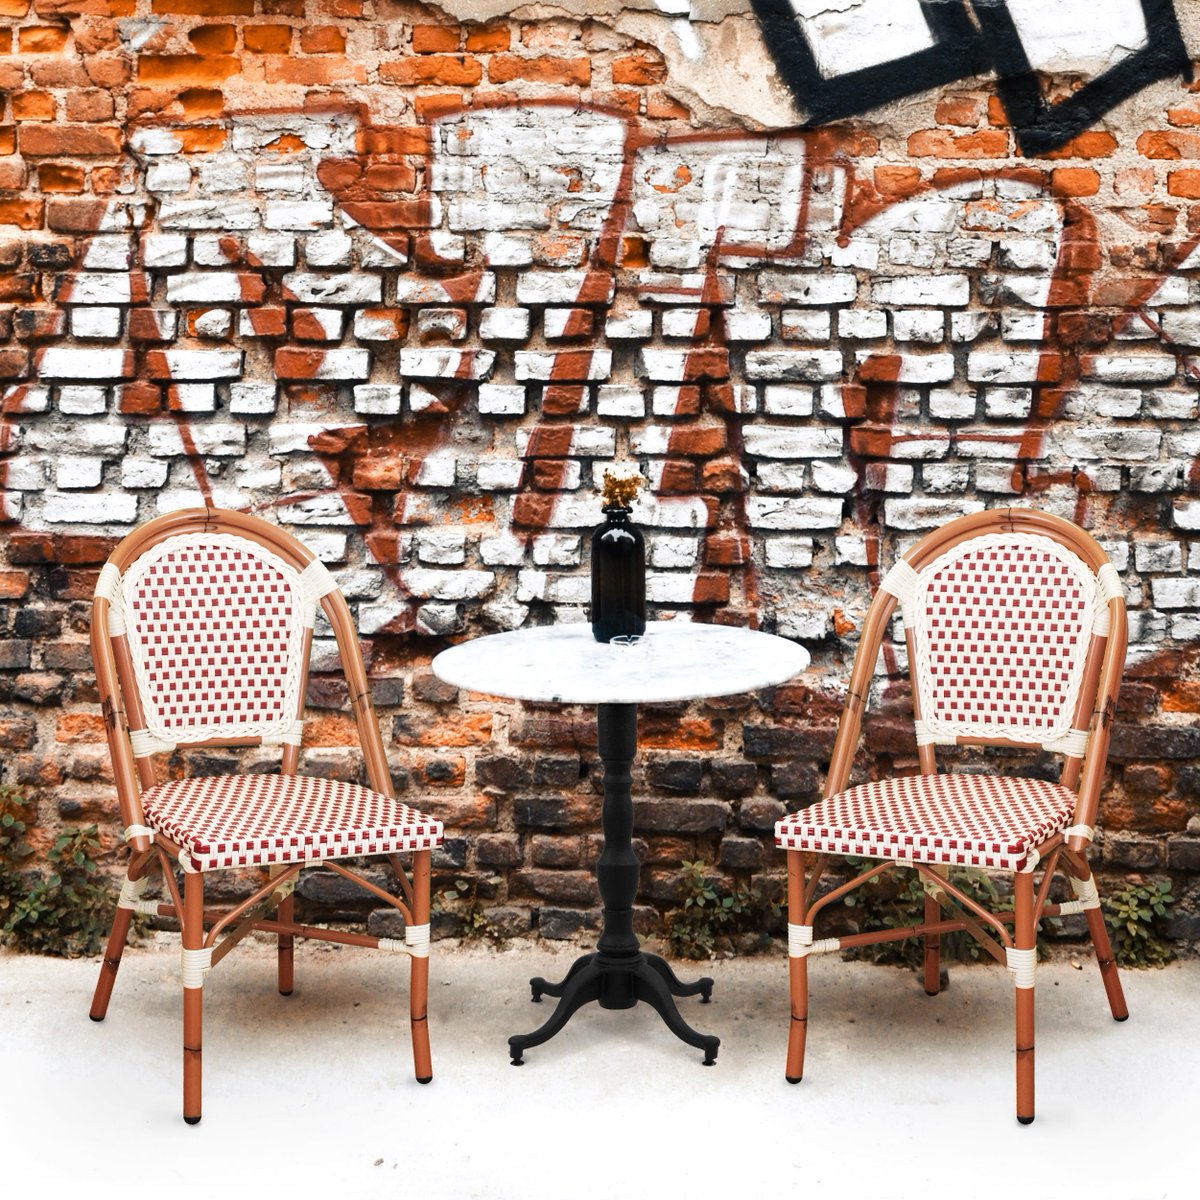 The 1000 cross-style table base can easily be paired with most dining chairs, and our Paris Cafe Patio Bistro Dining Chair is arguably one of the best.
#TableBase #DiningChair #Paris #Outdoor